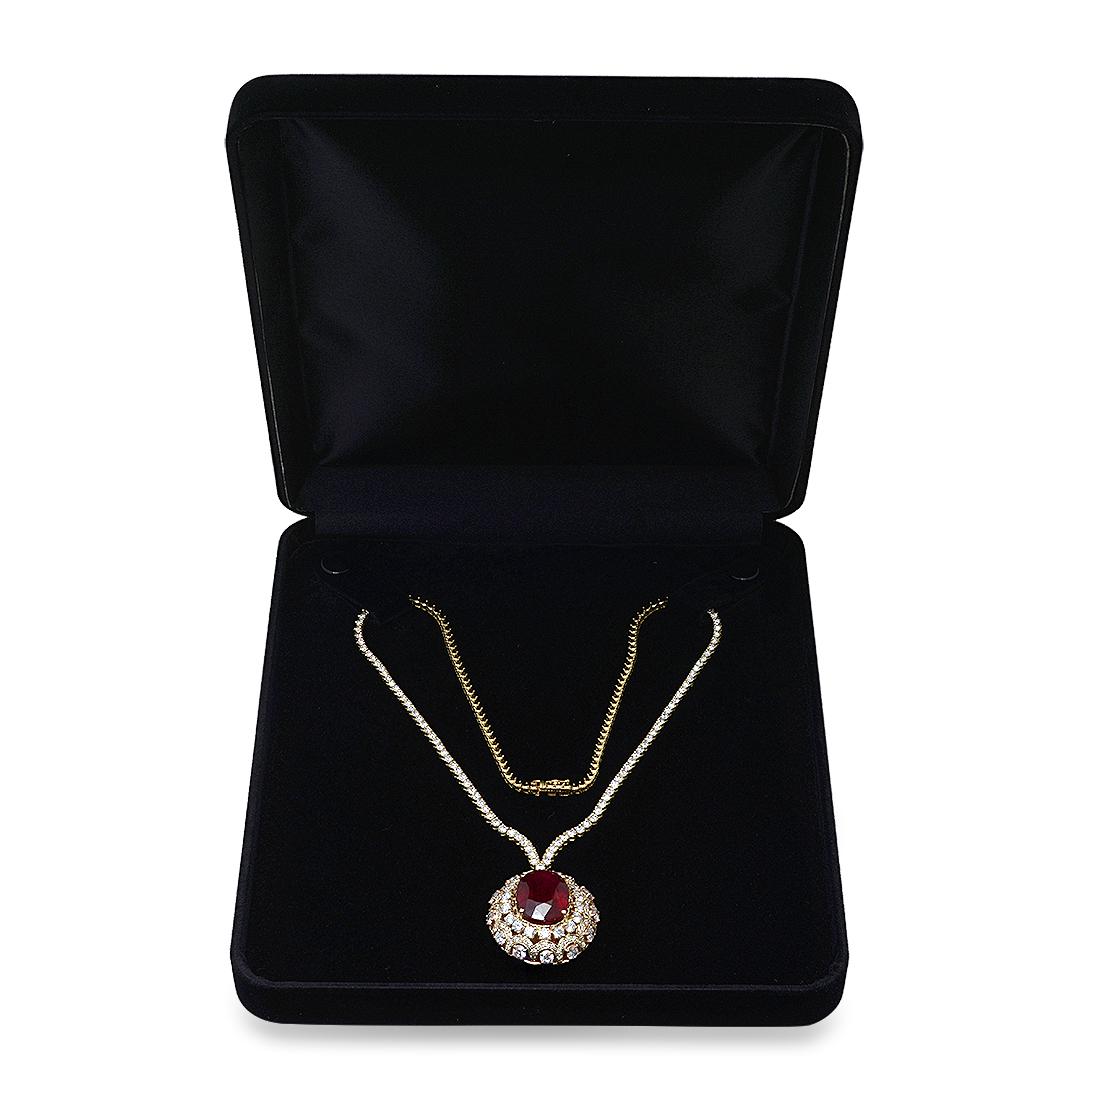 18K Yellow Gold and 14K Rose Gold 15.45ct Ruby and 10.65ct Diamond Necklace